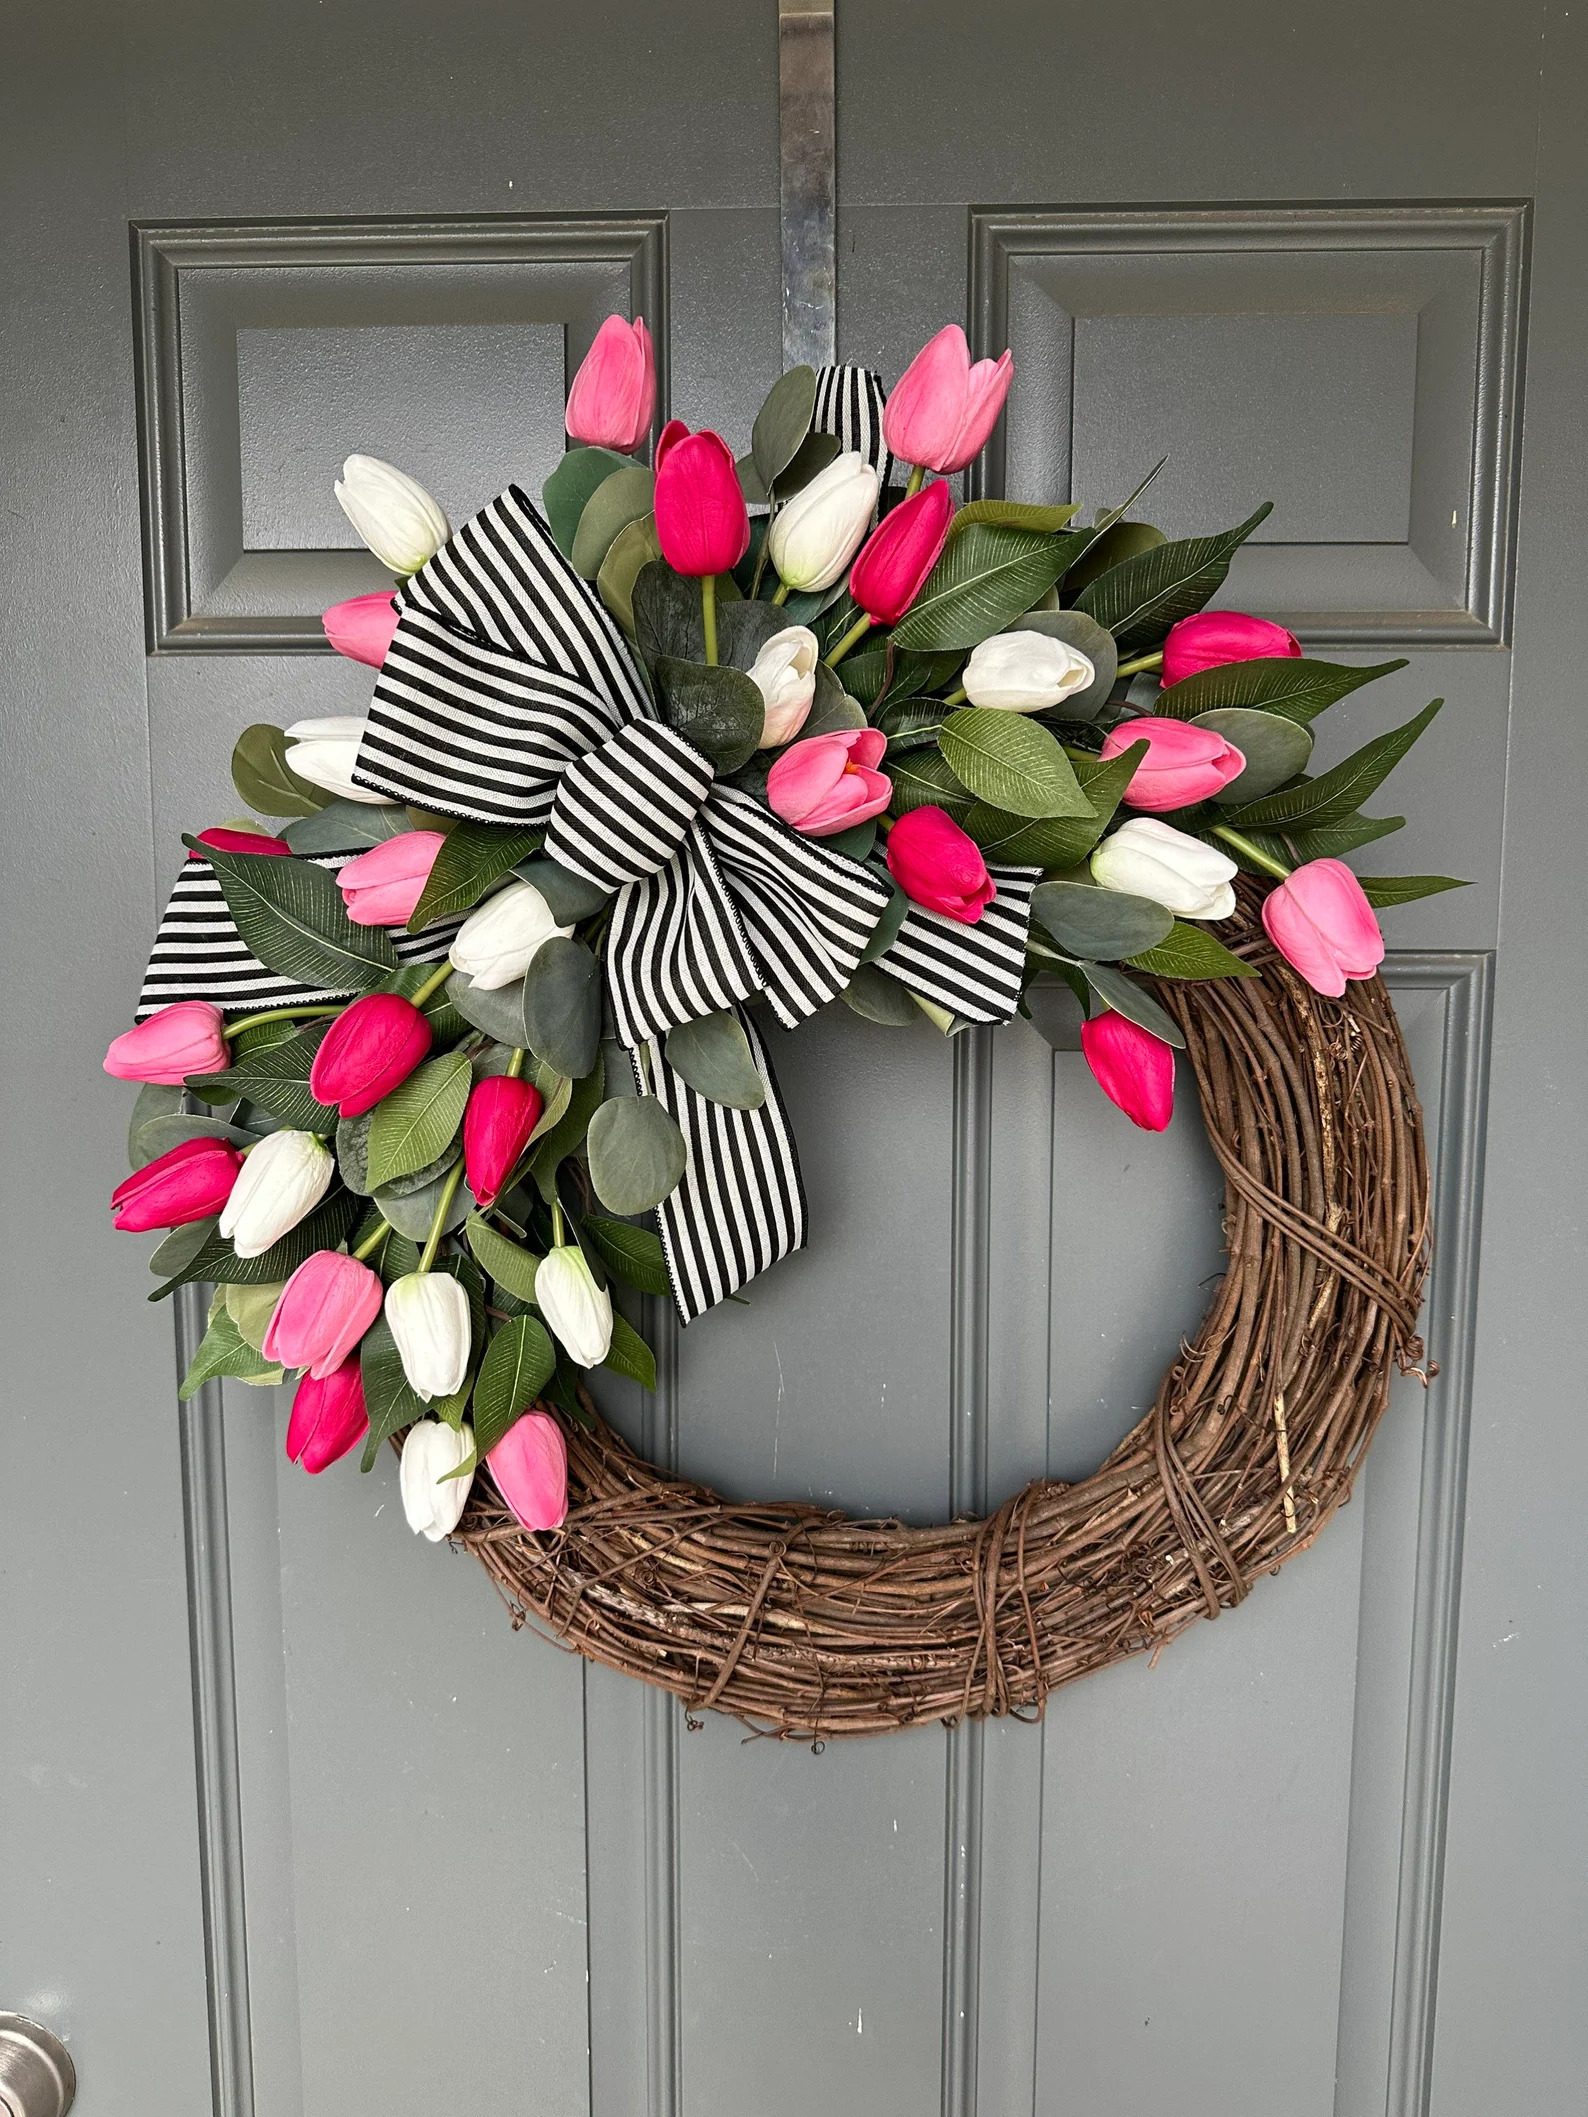 15 Stunning Spring Wreath Designs to Welcome the Season